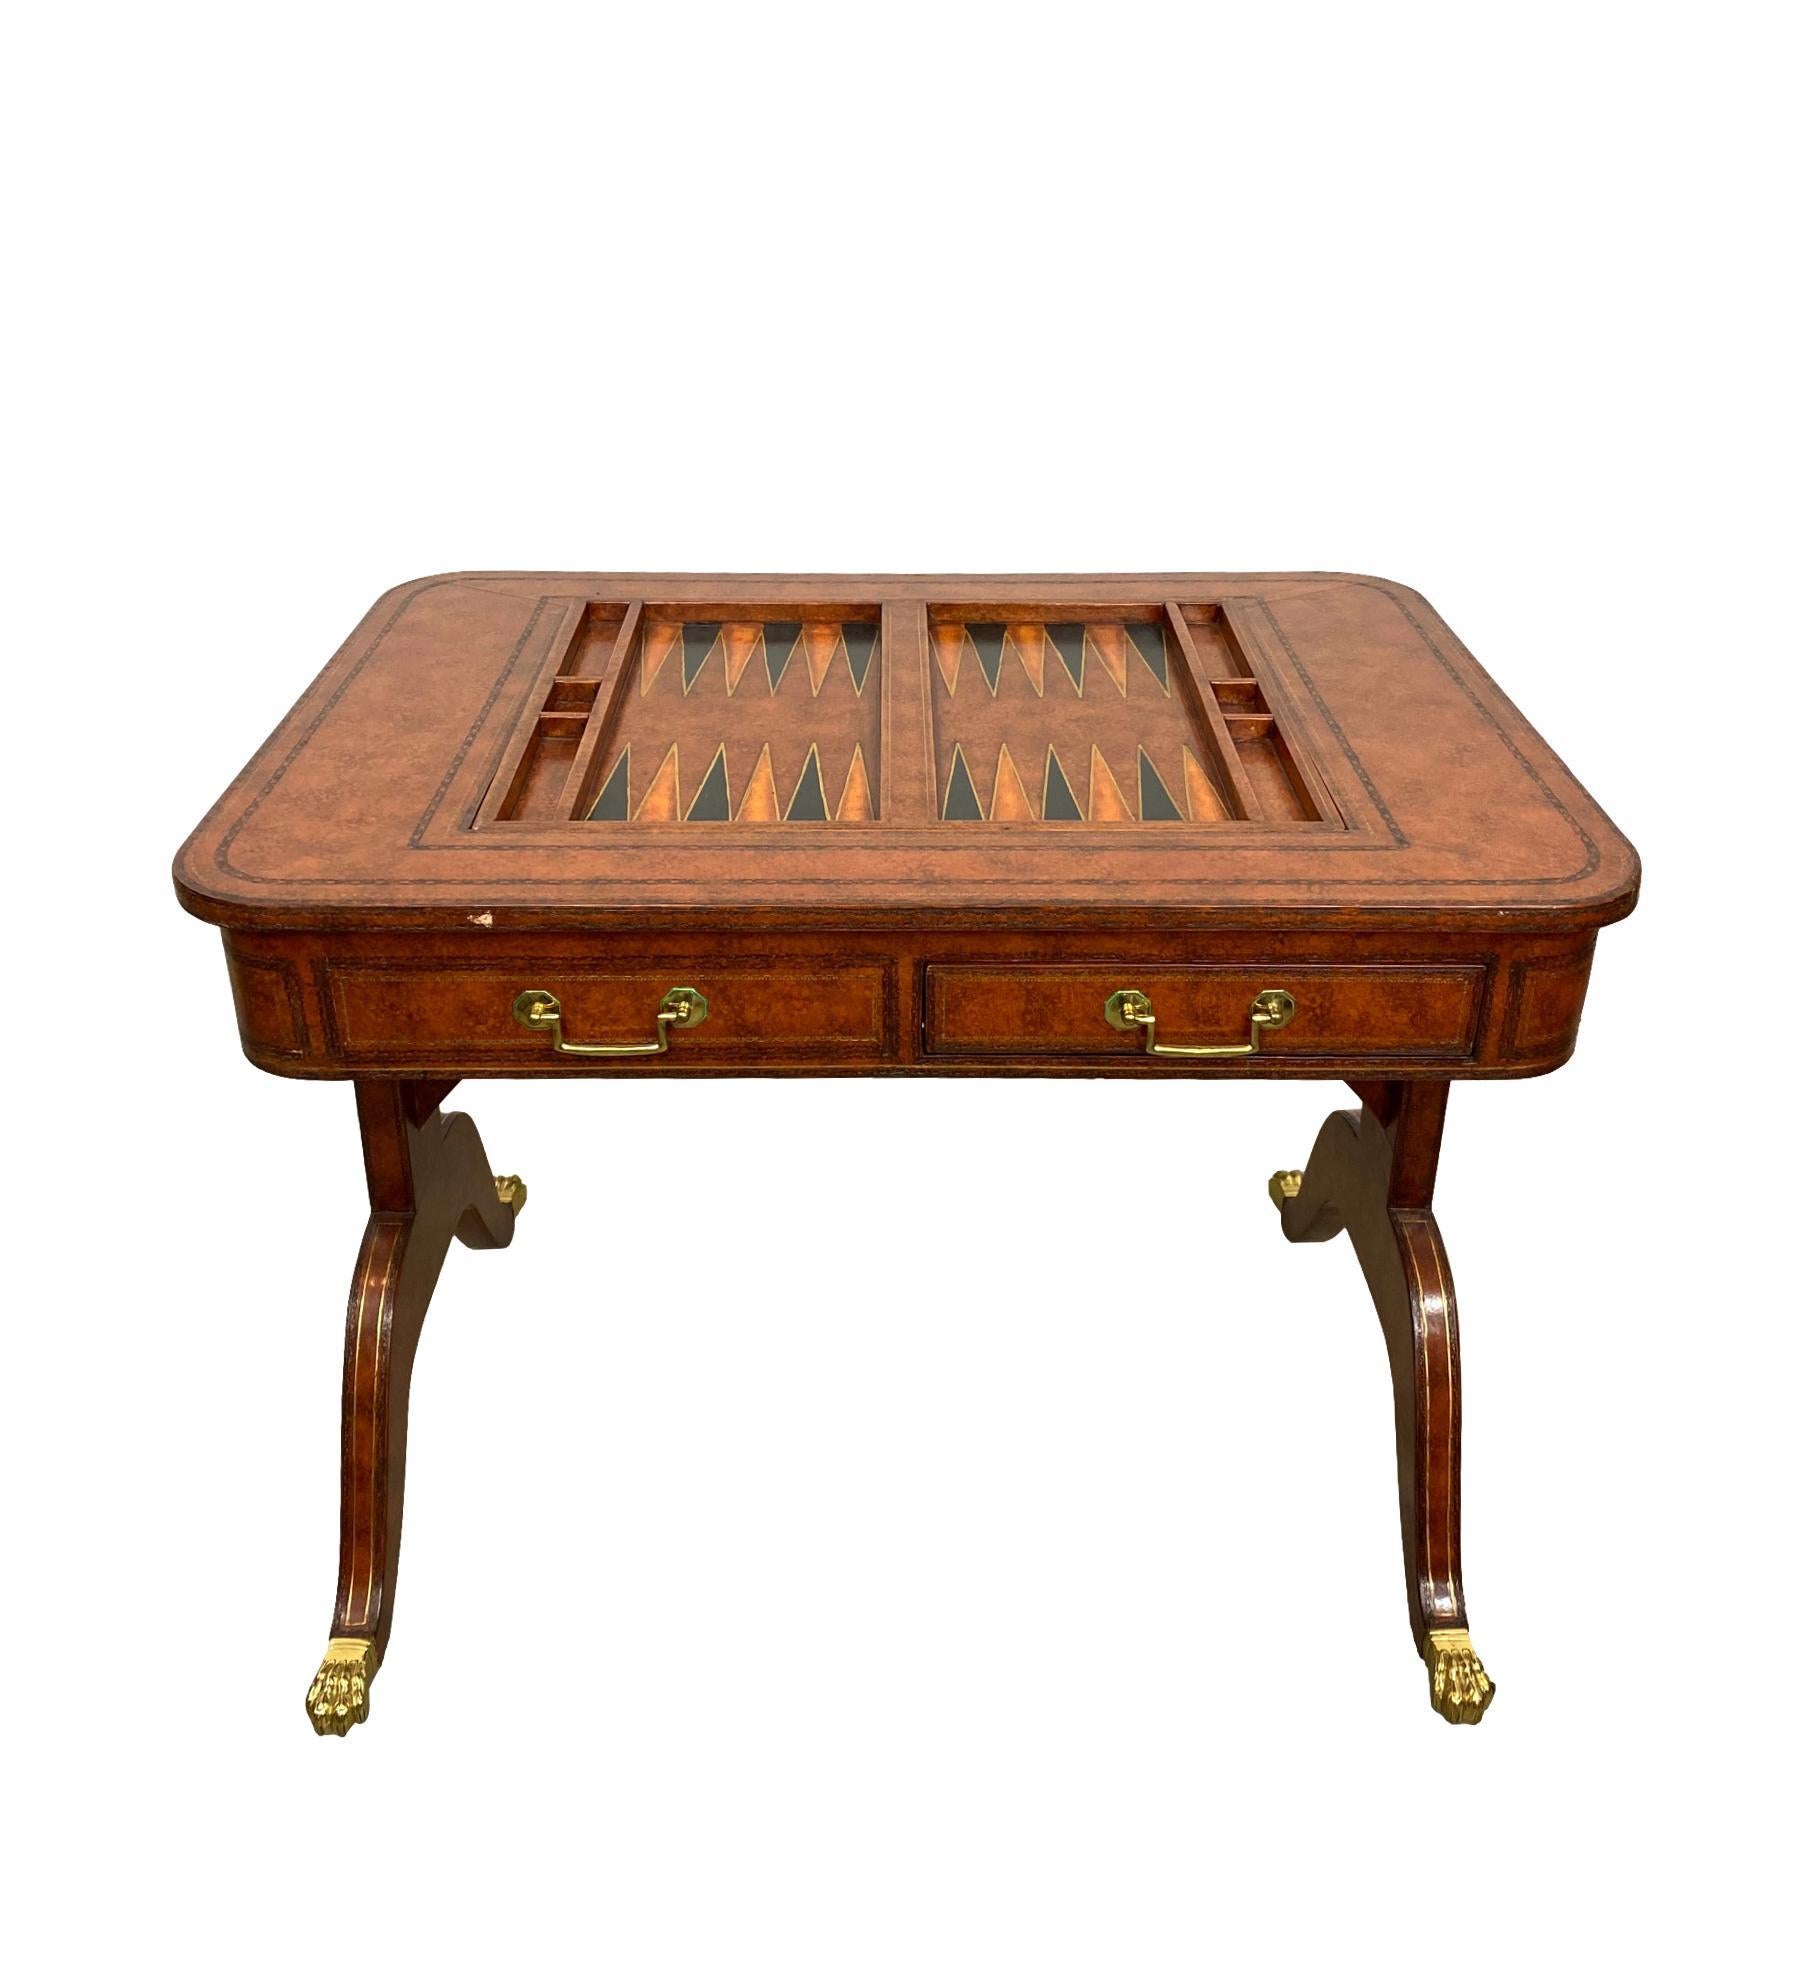 Maitland-Smith Regency-style chess/backgammon board table, covered in tooled and embossed leather, with gilded highlights, the single stretcher bar above Regency-style legs, with gilded leather stringing, on brass castors with hairy paw toe covers,